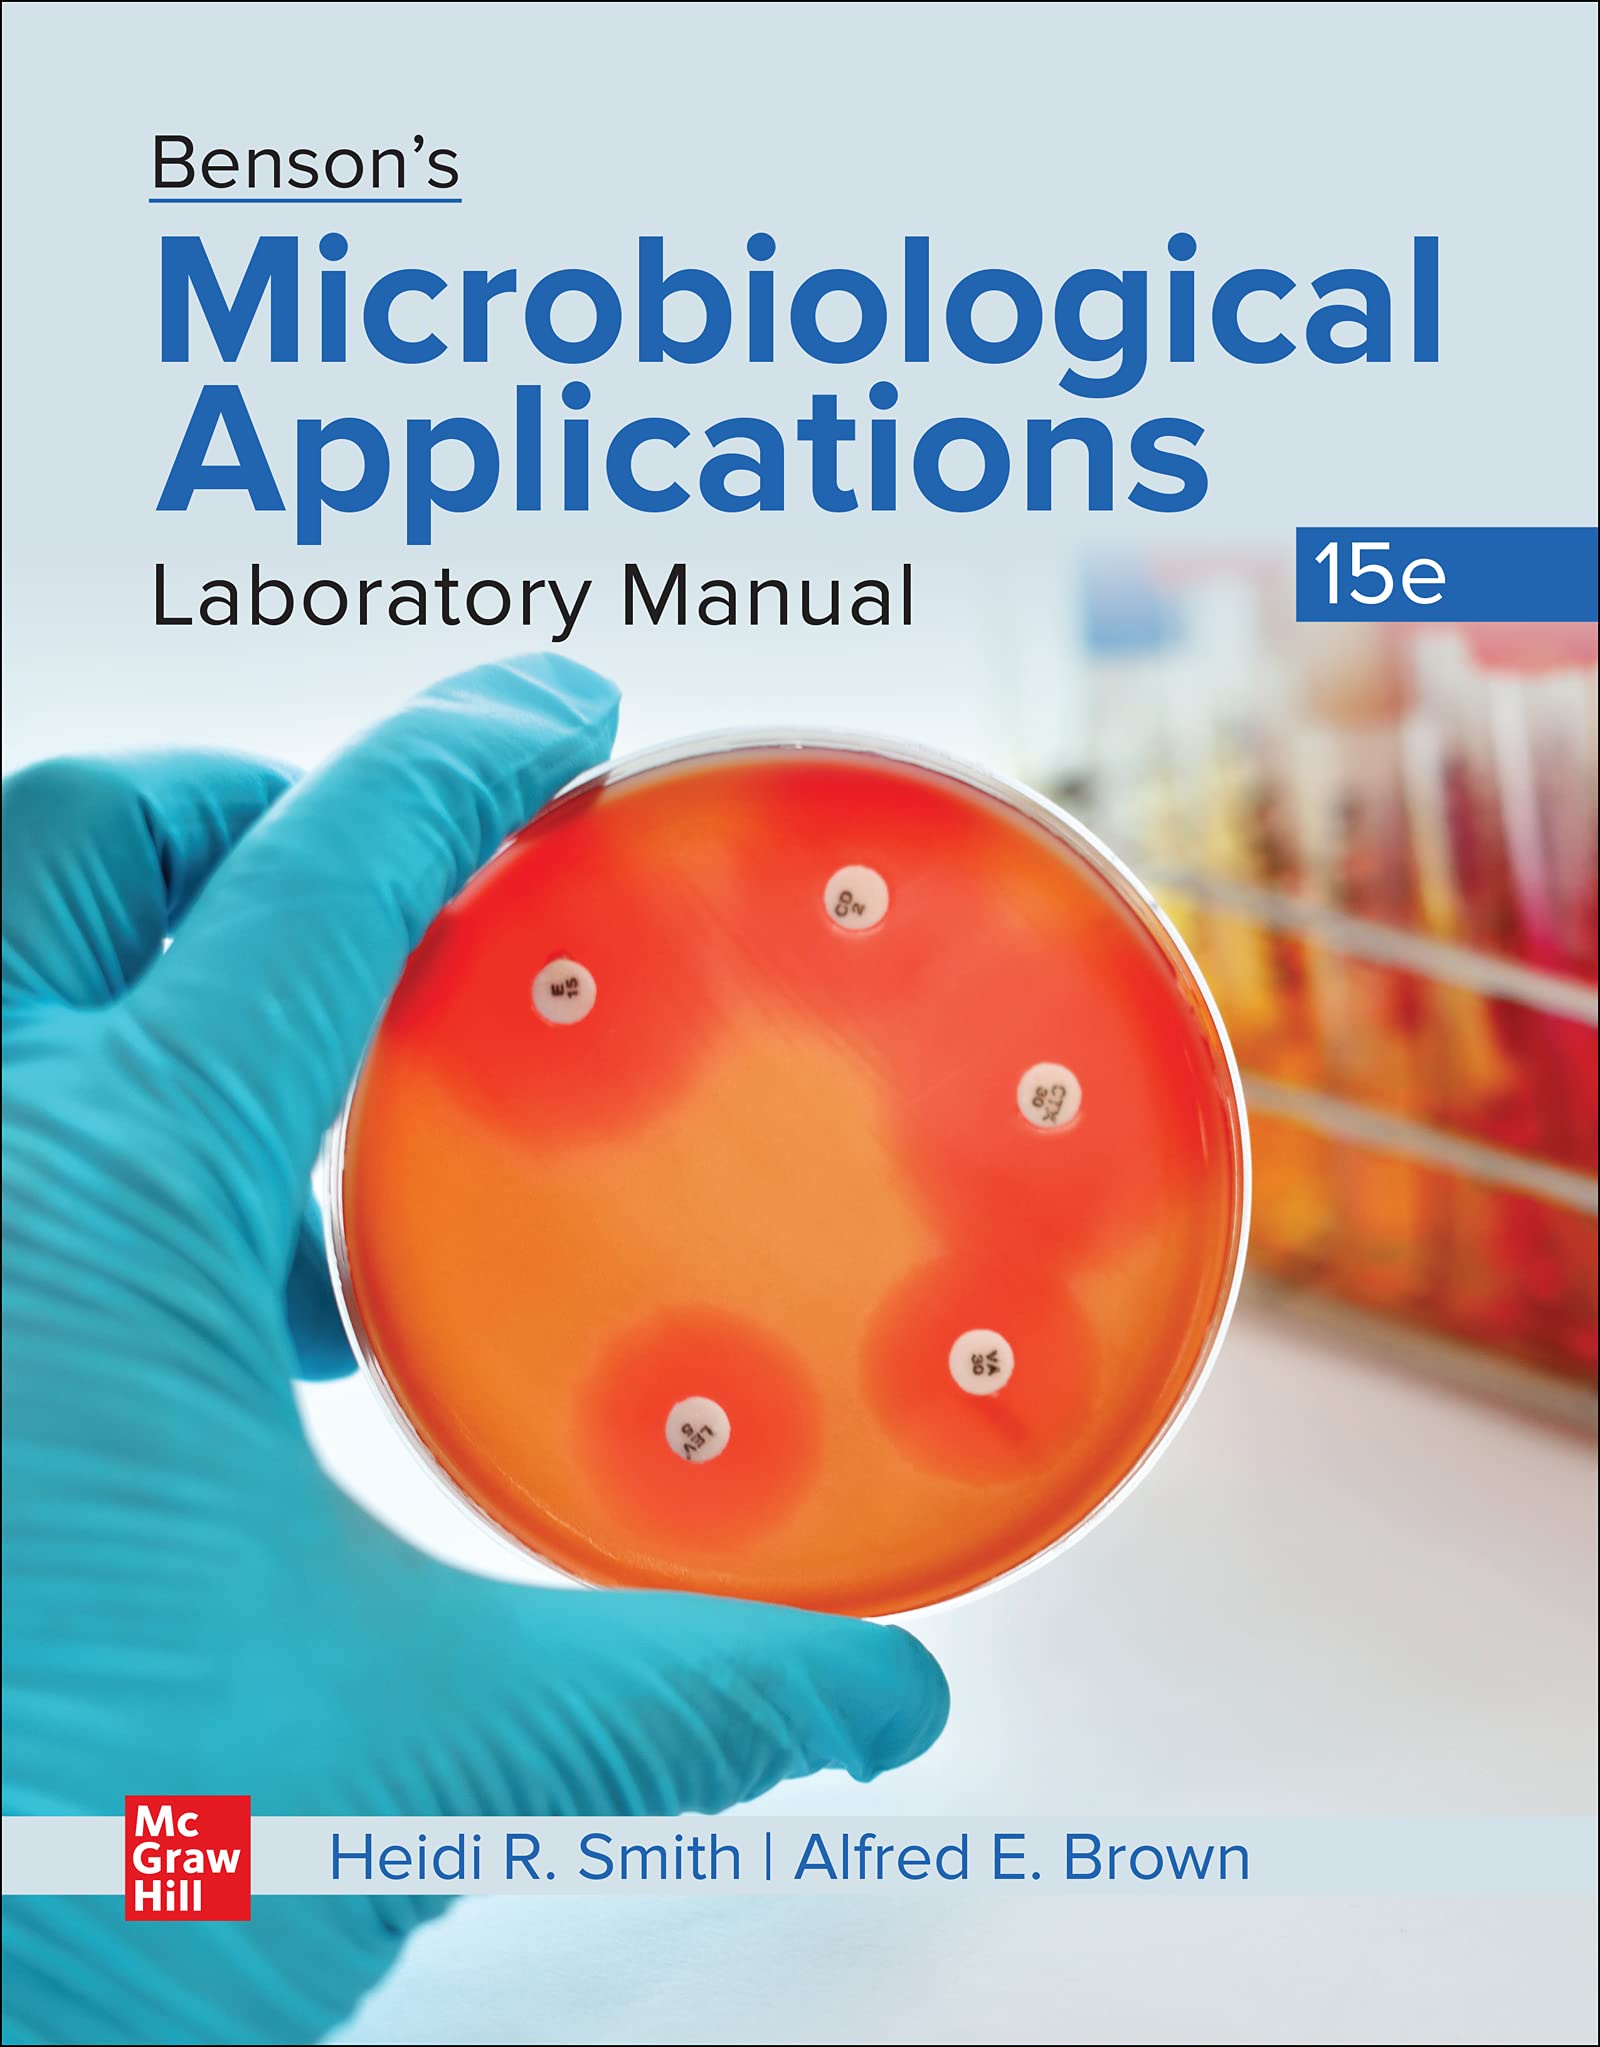 Microbiological Applications